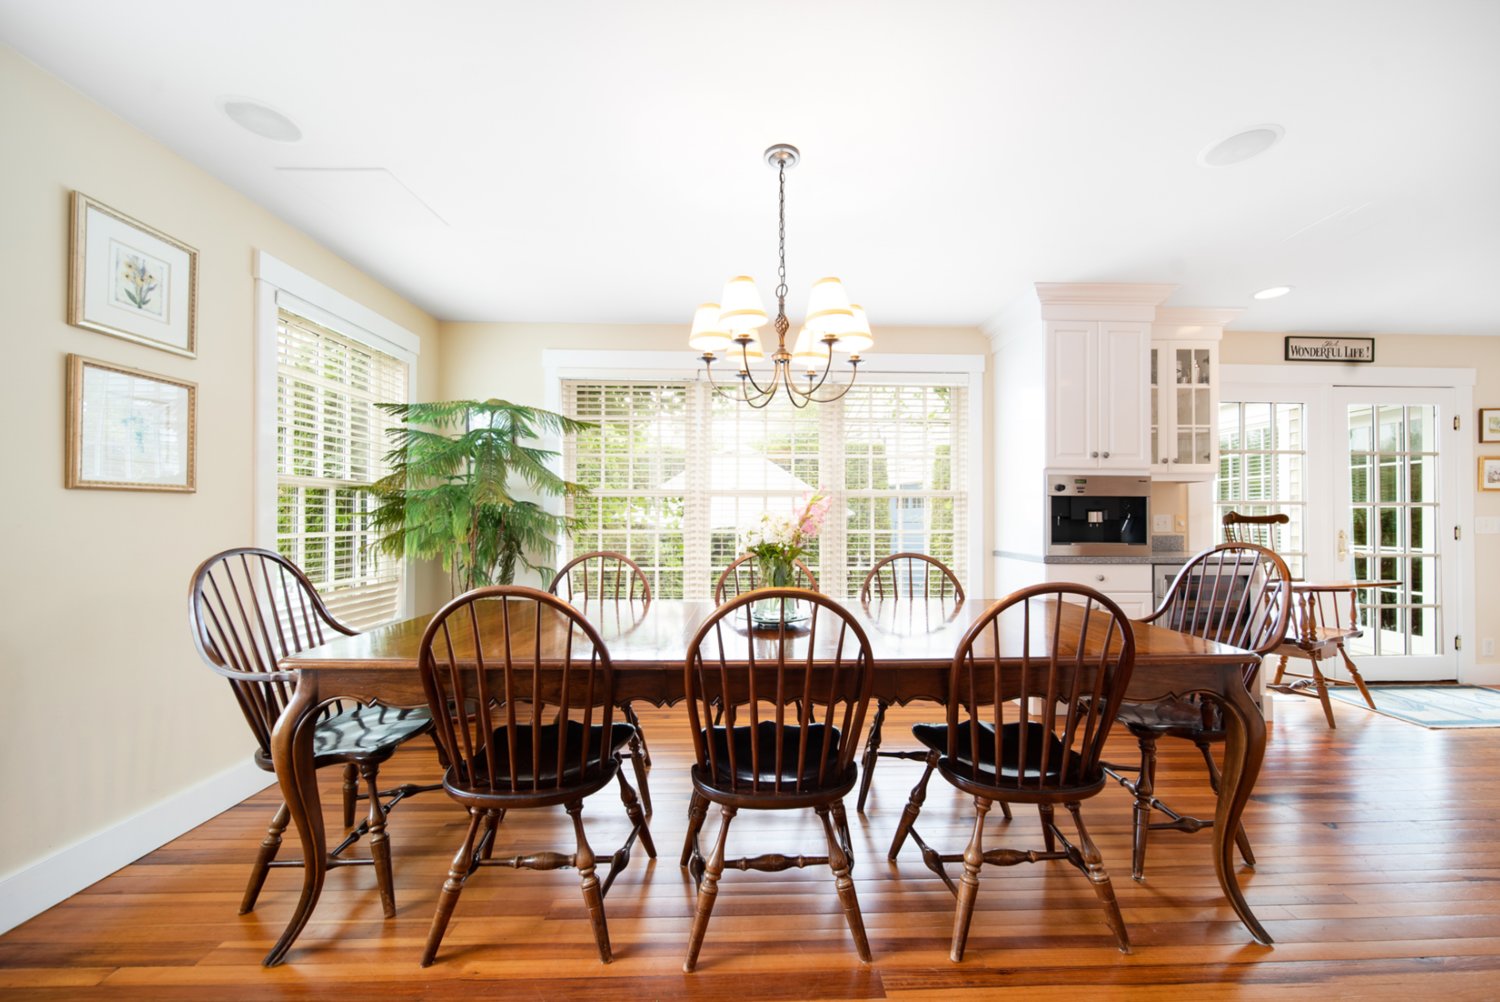 The dining area, located just off the kitchen, has glass doors that open directly to the back brick patio.